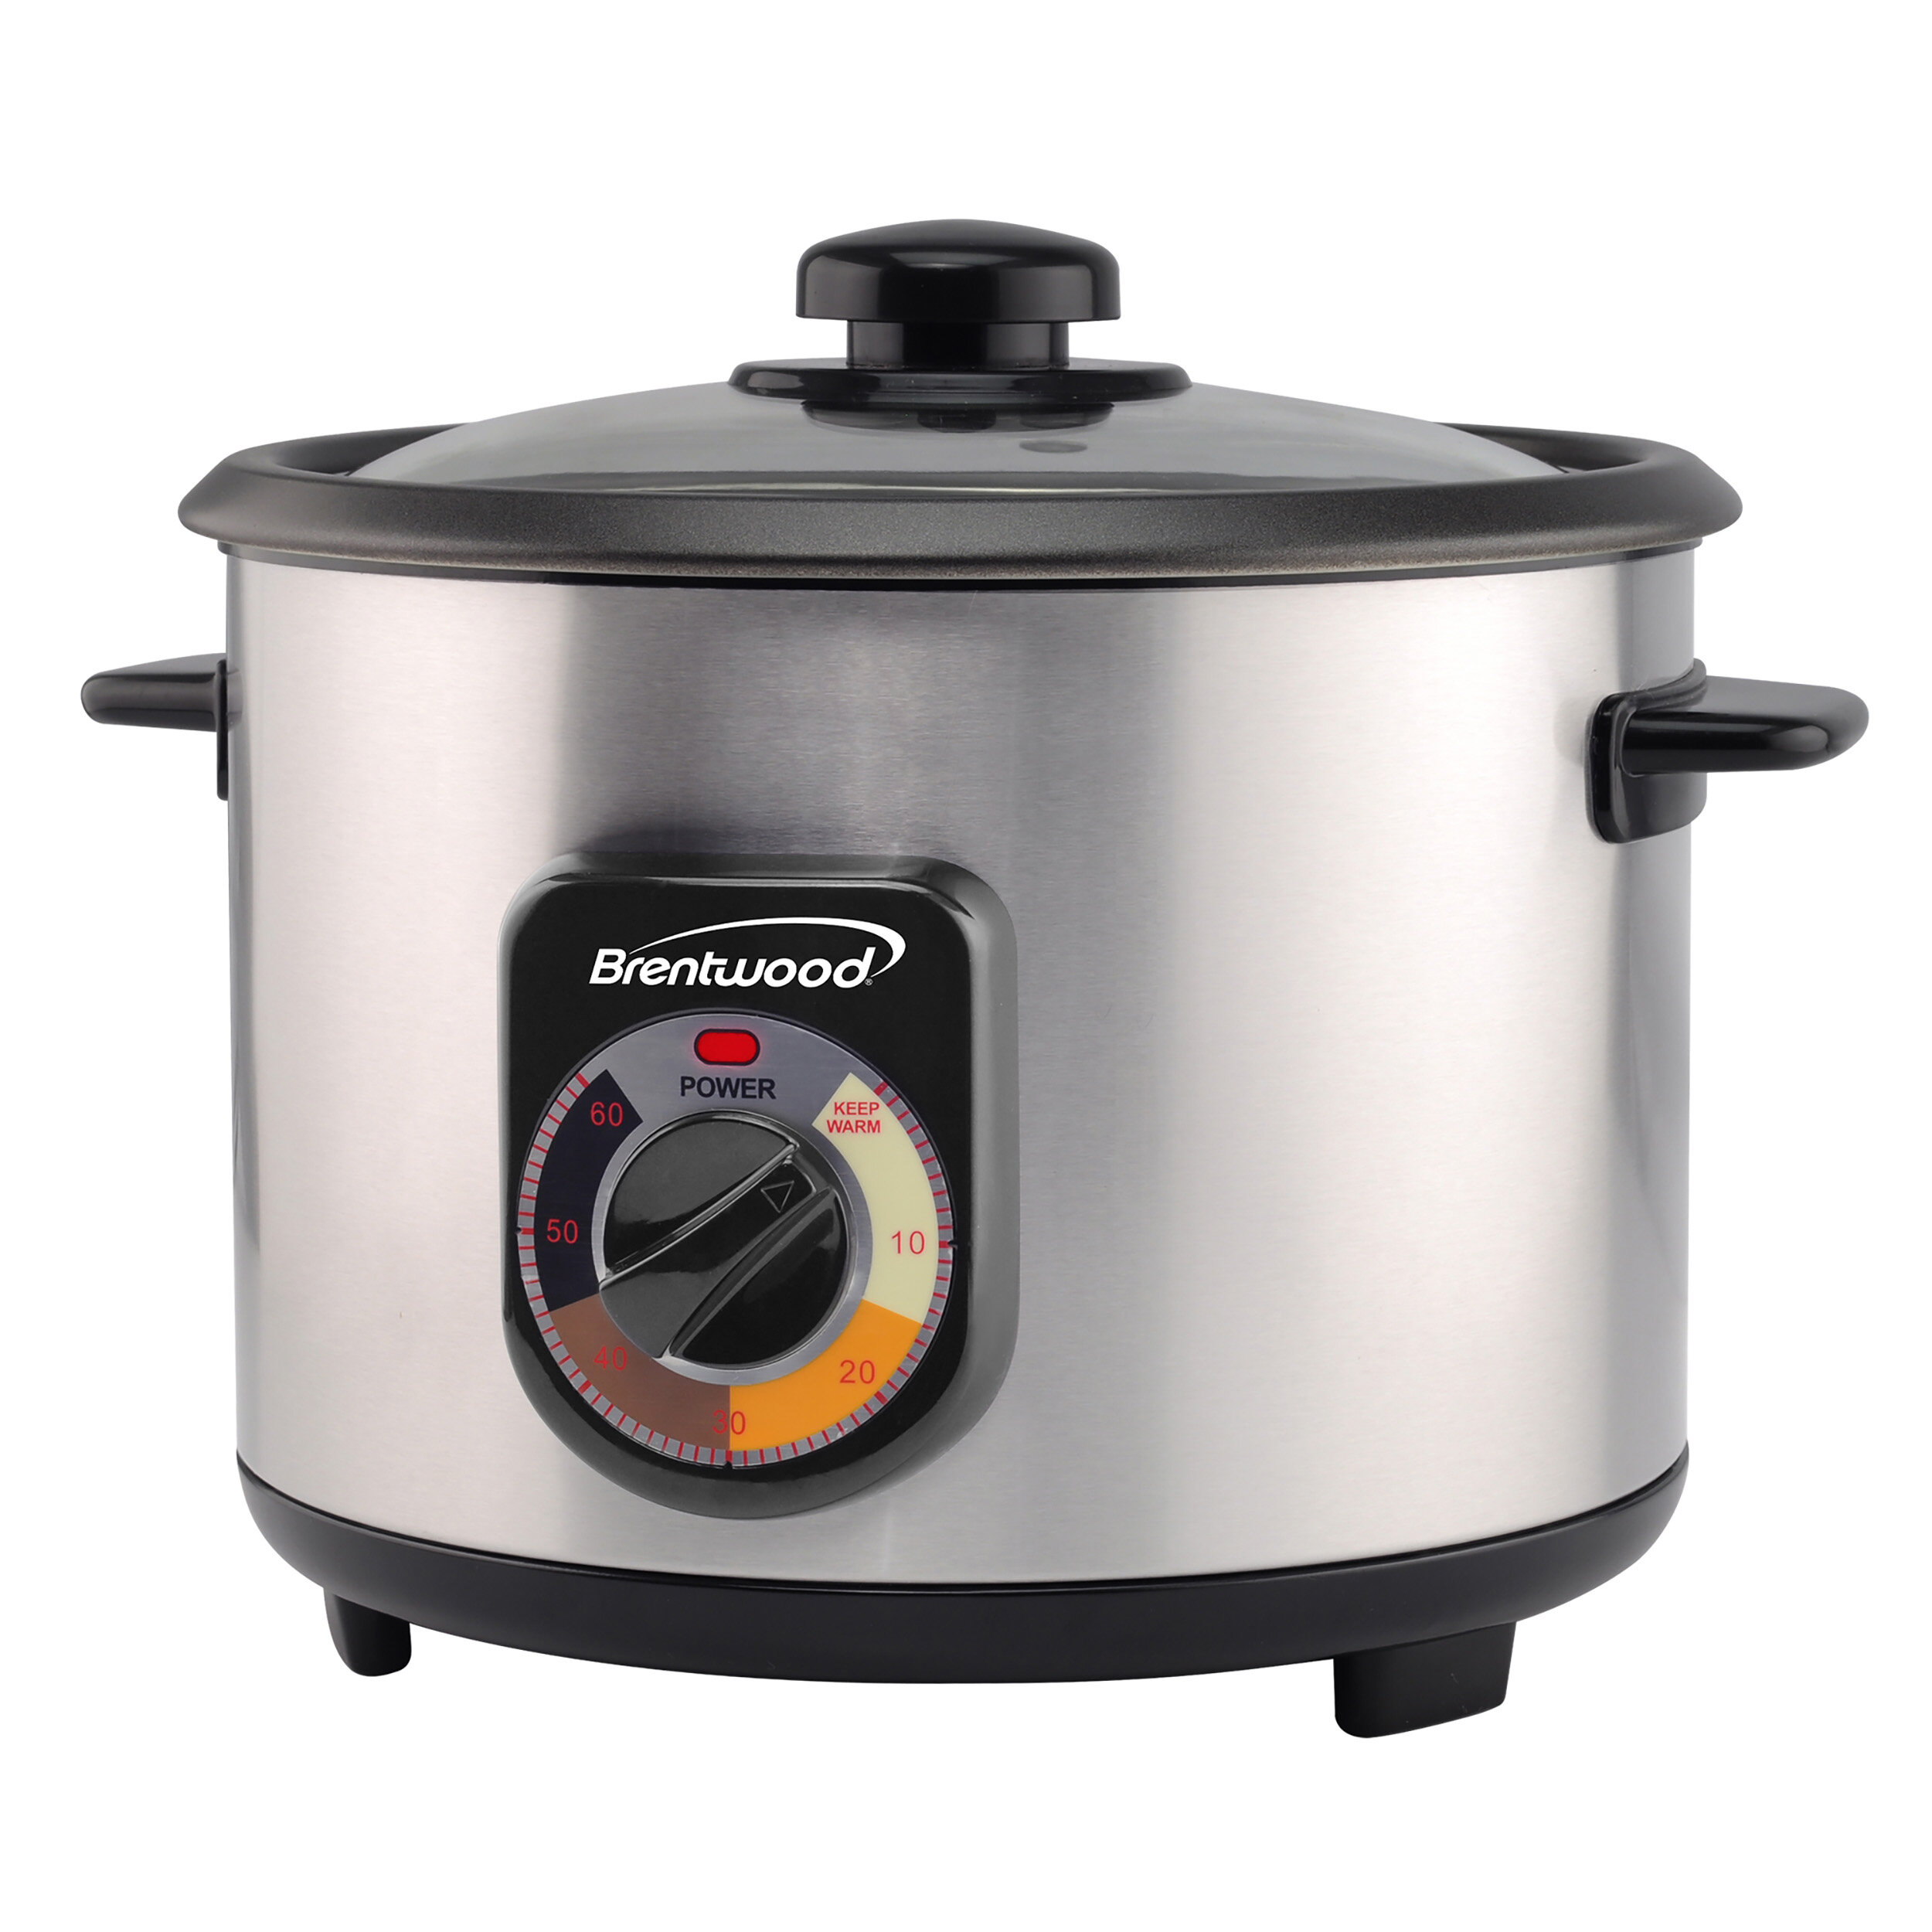 Electric cooking pot for rice, 500 W - Cuisinart